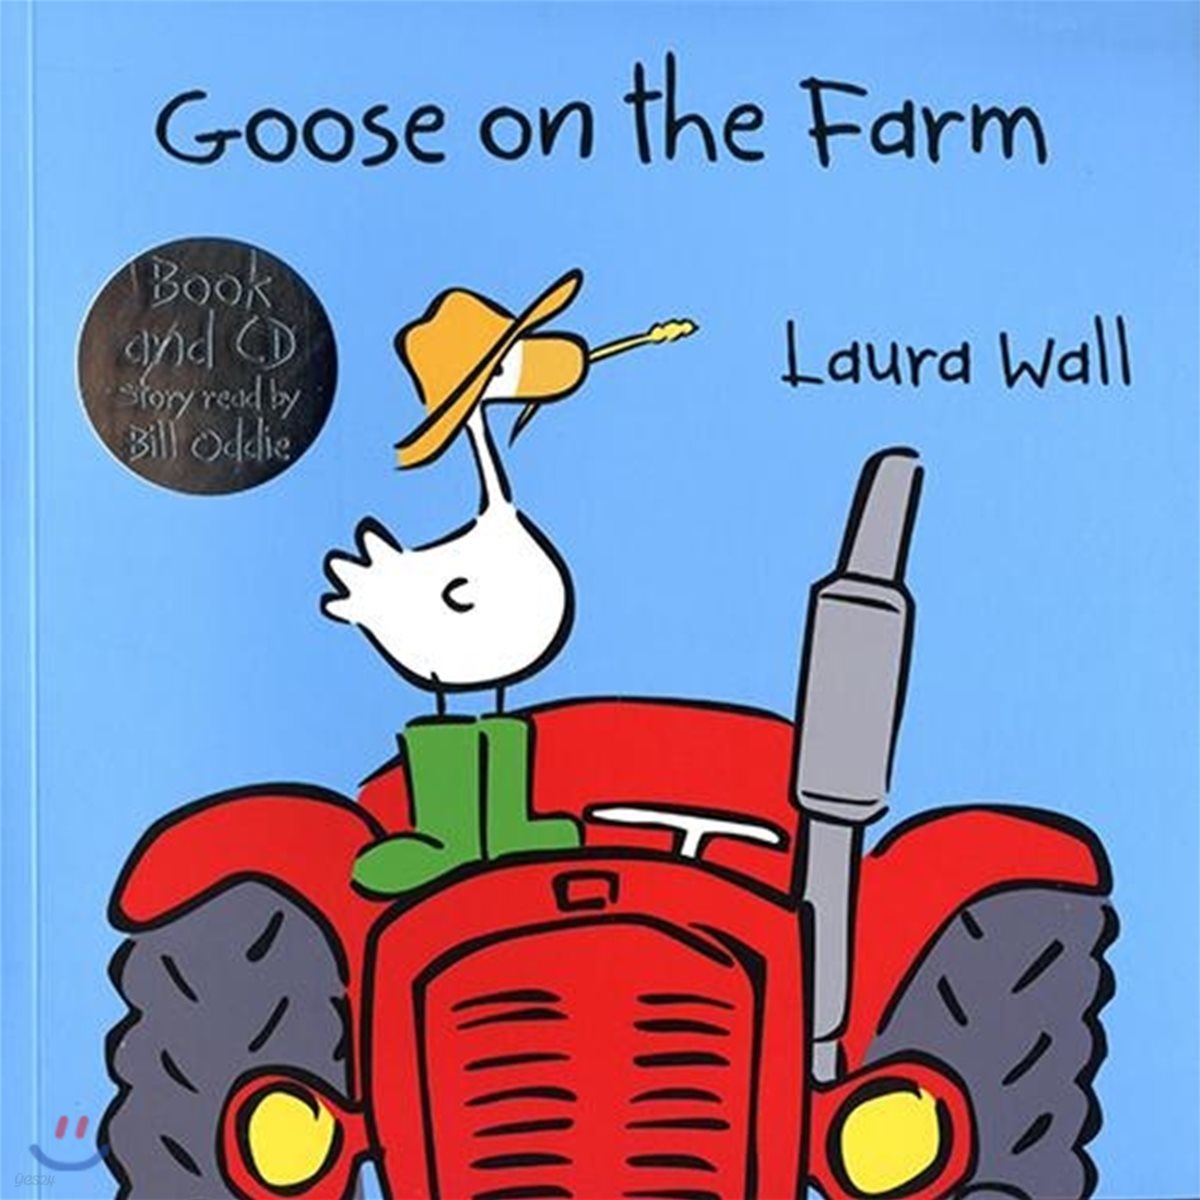 Goose on the Farm (Book and CD)